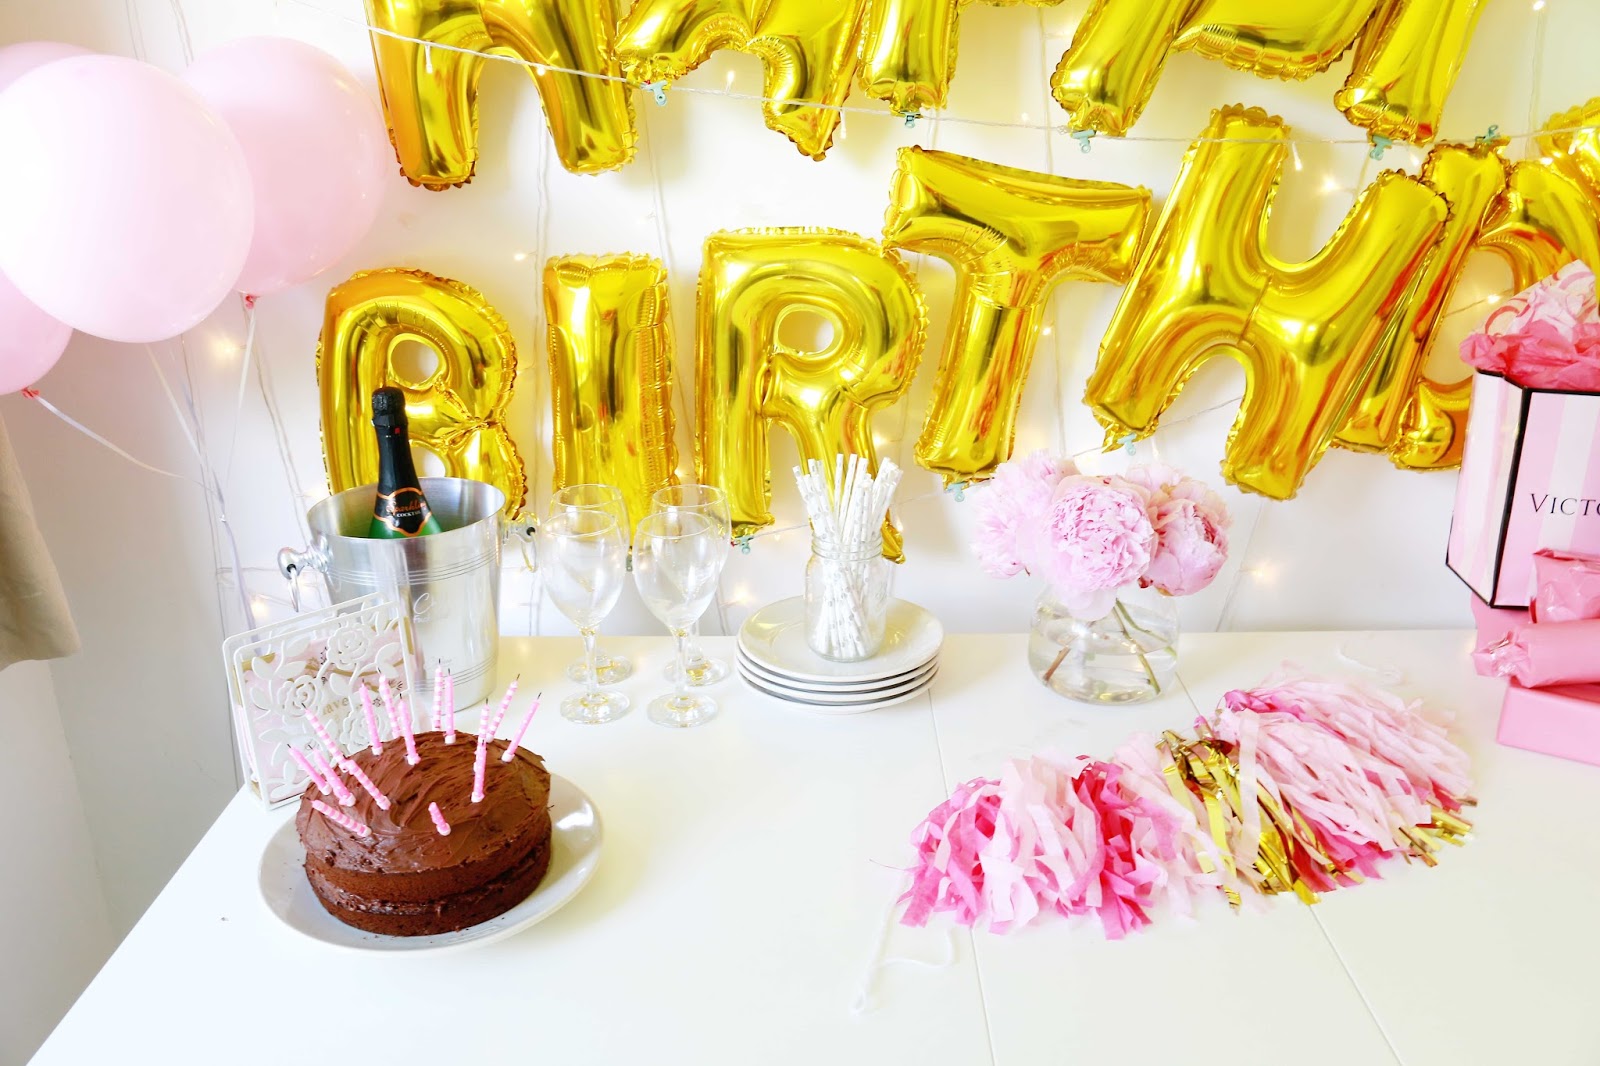 party, how to do birthday brunch on a budget, pinterest, balloons, birthday party, lifestyle, party, cheap party, pinterest party ideas, bithday brunch 